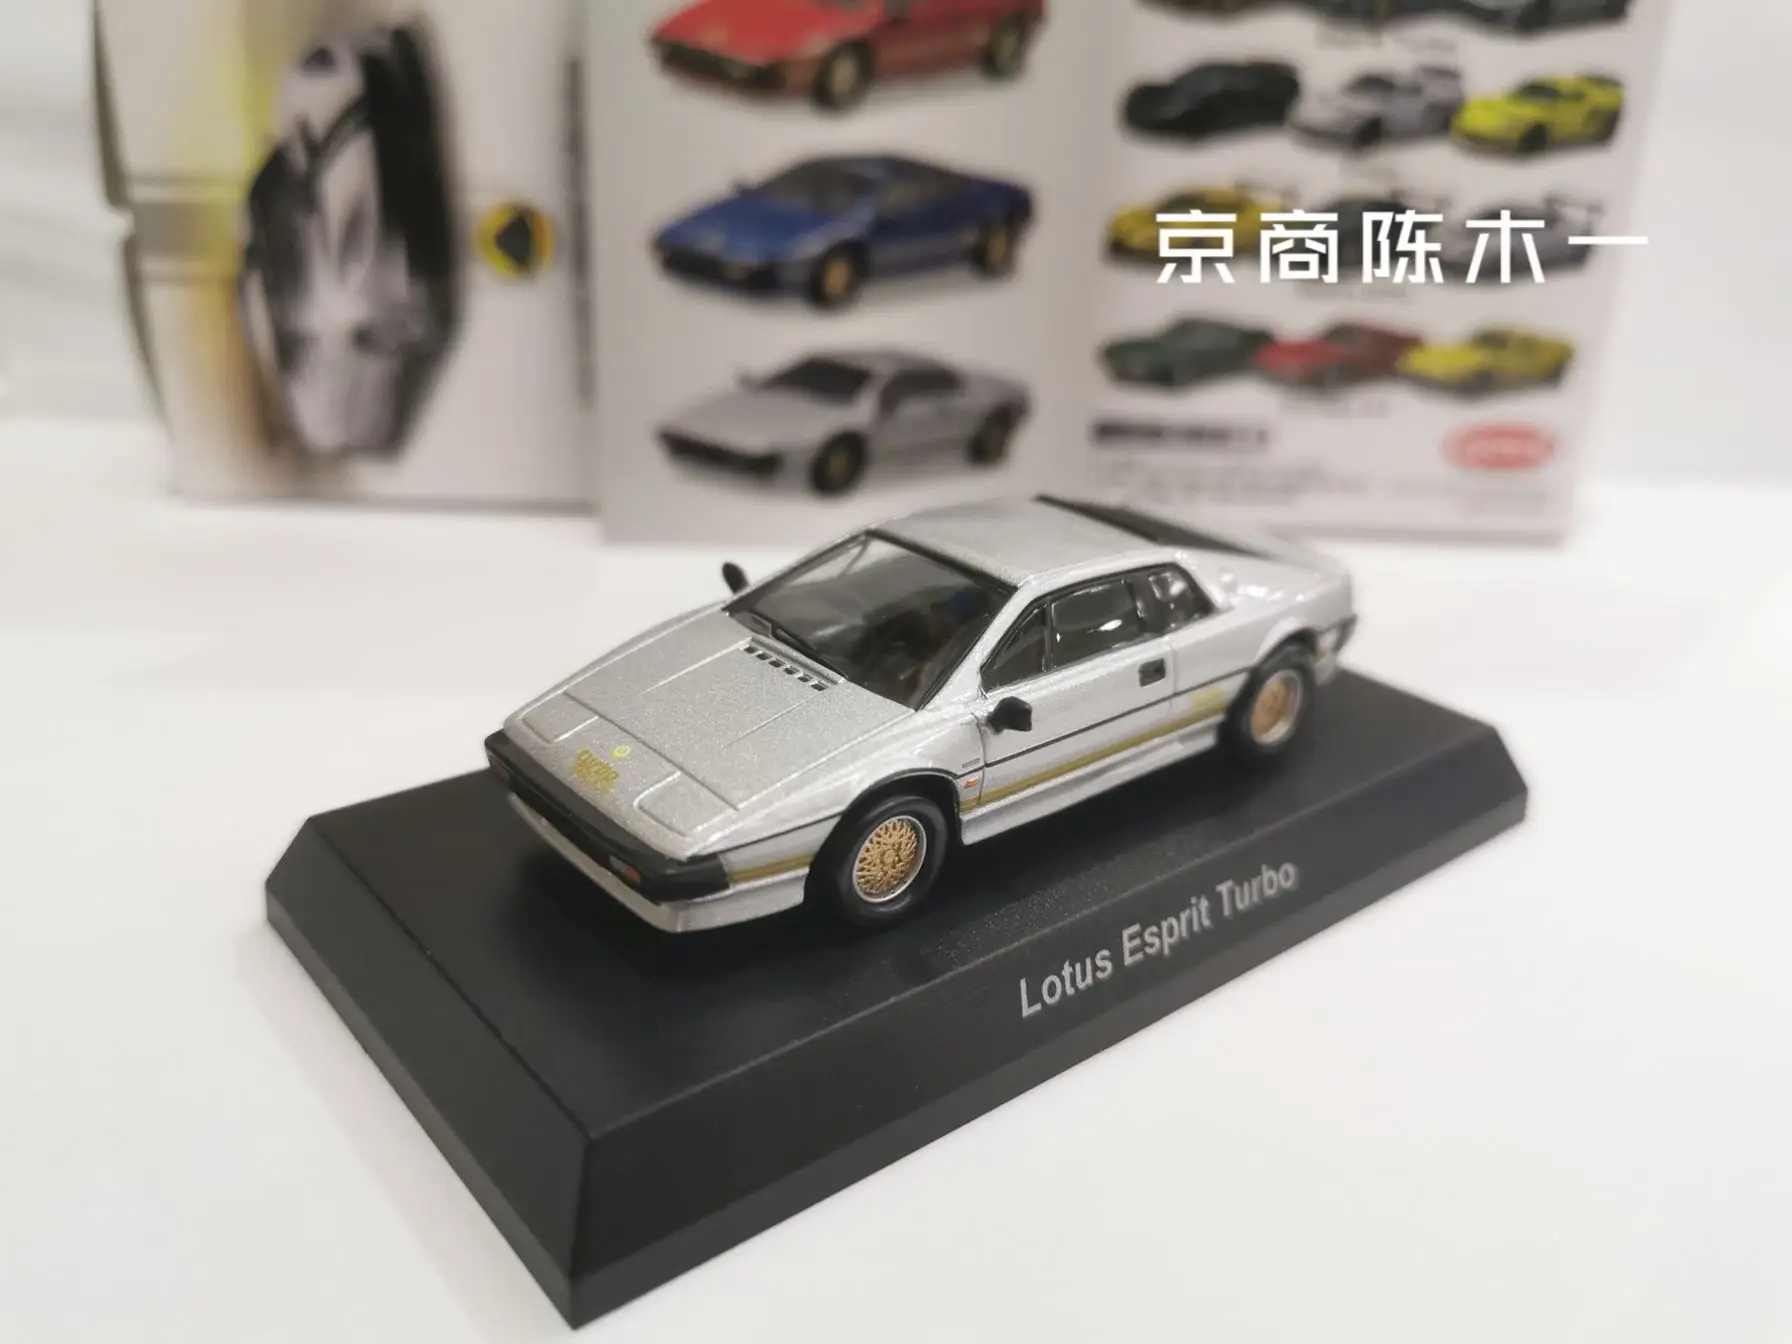 

1/64 KYOSHO Lotus Esprit Turbo Collection of die-cast alloy car decoration model toys